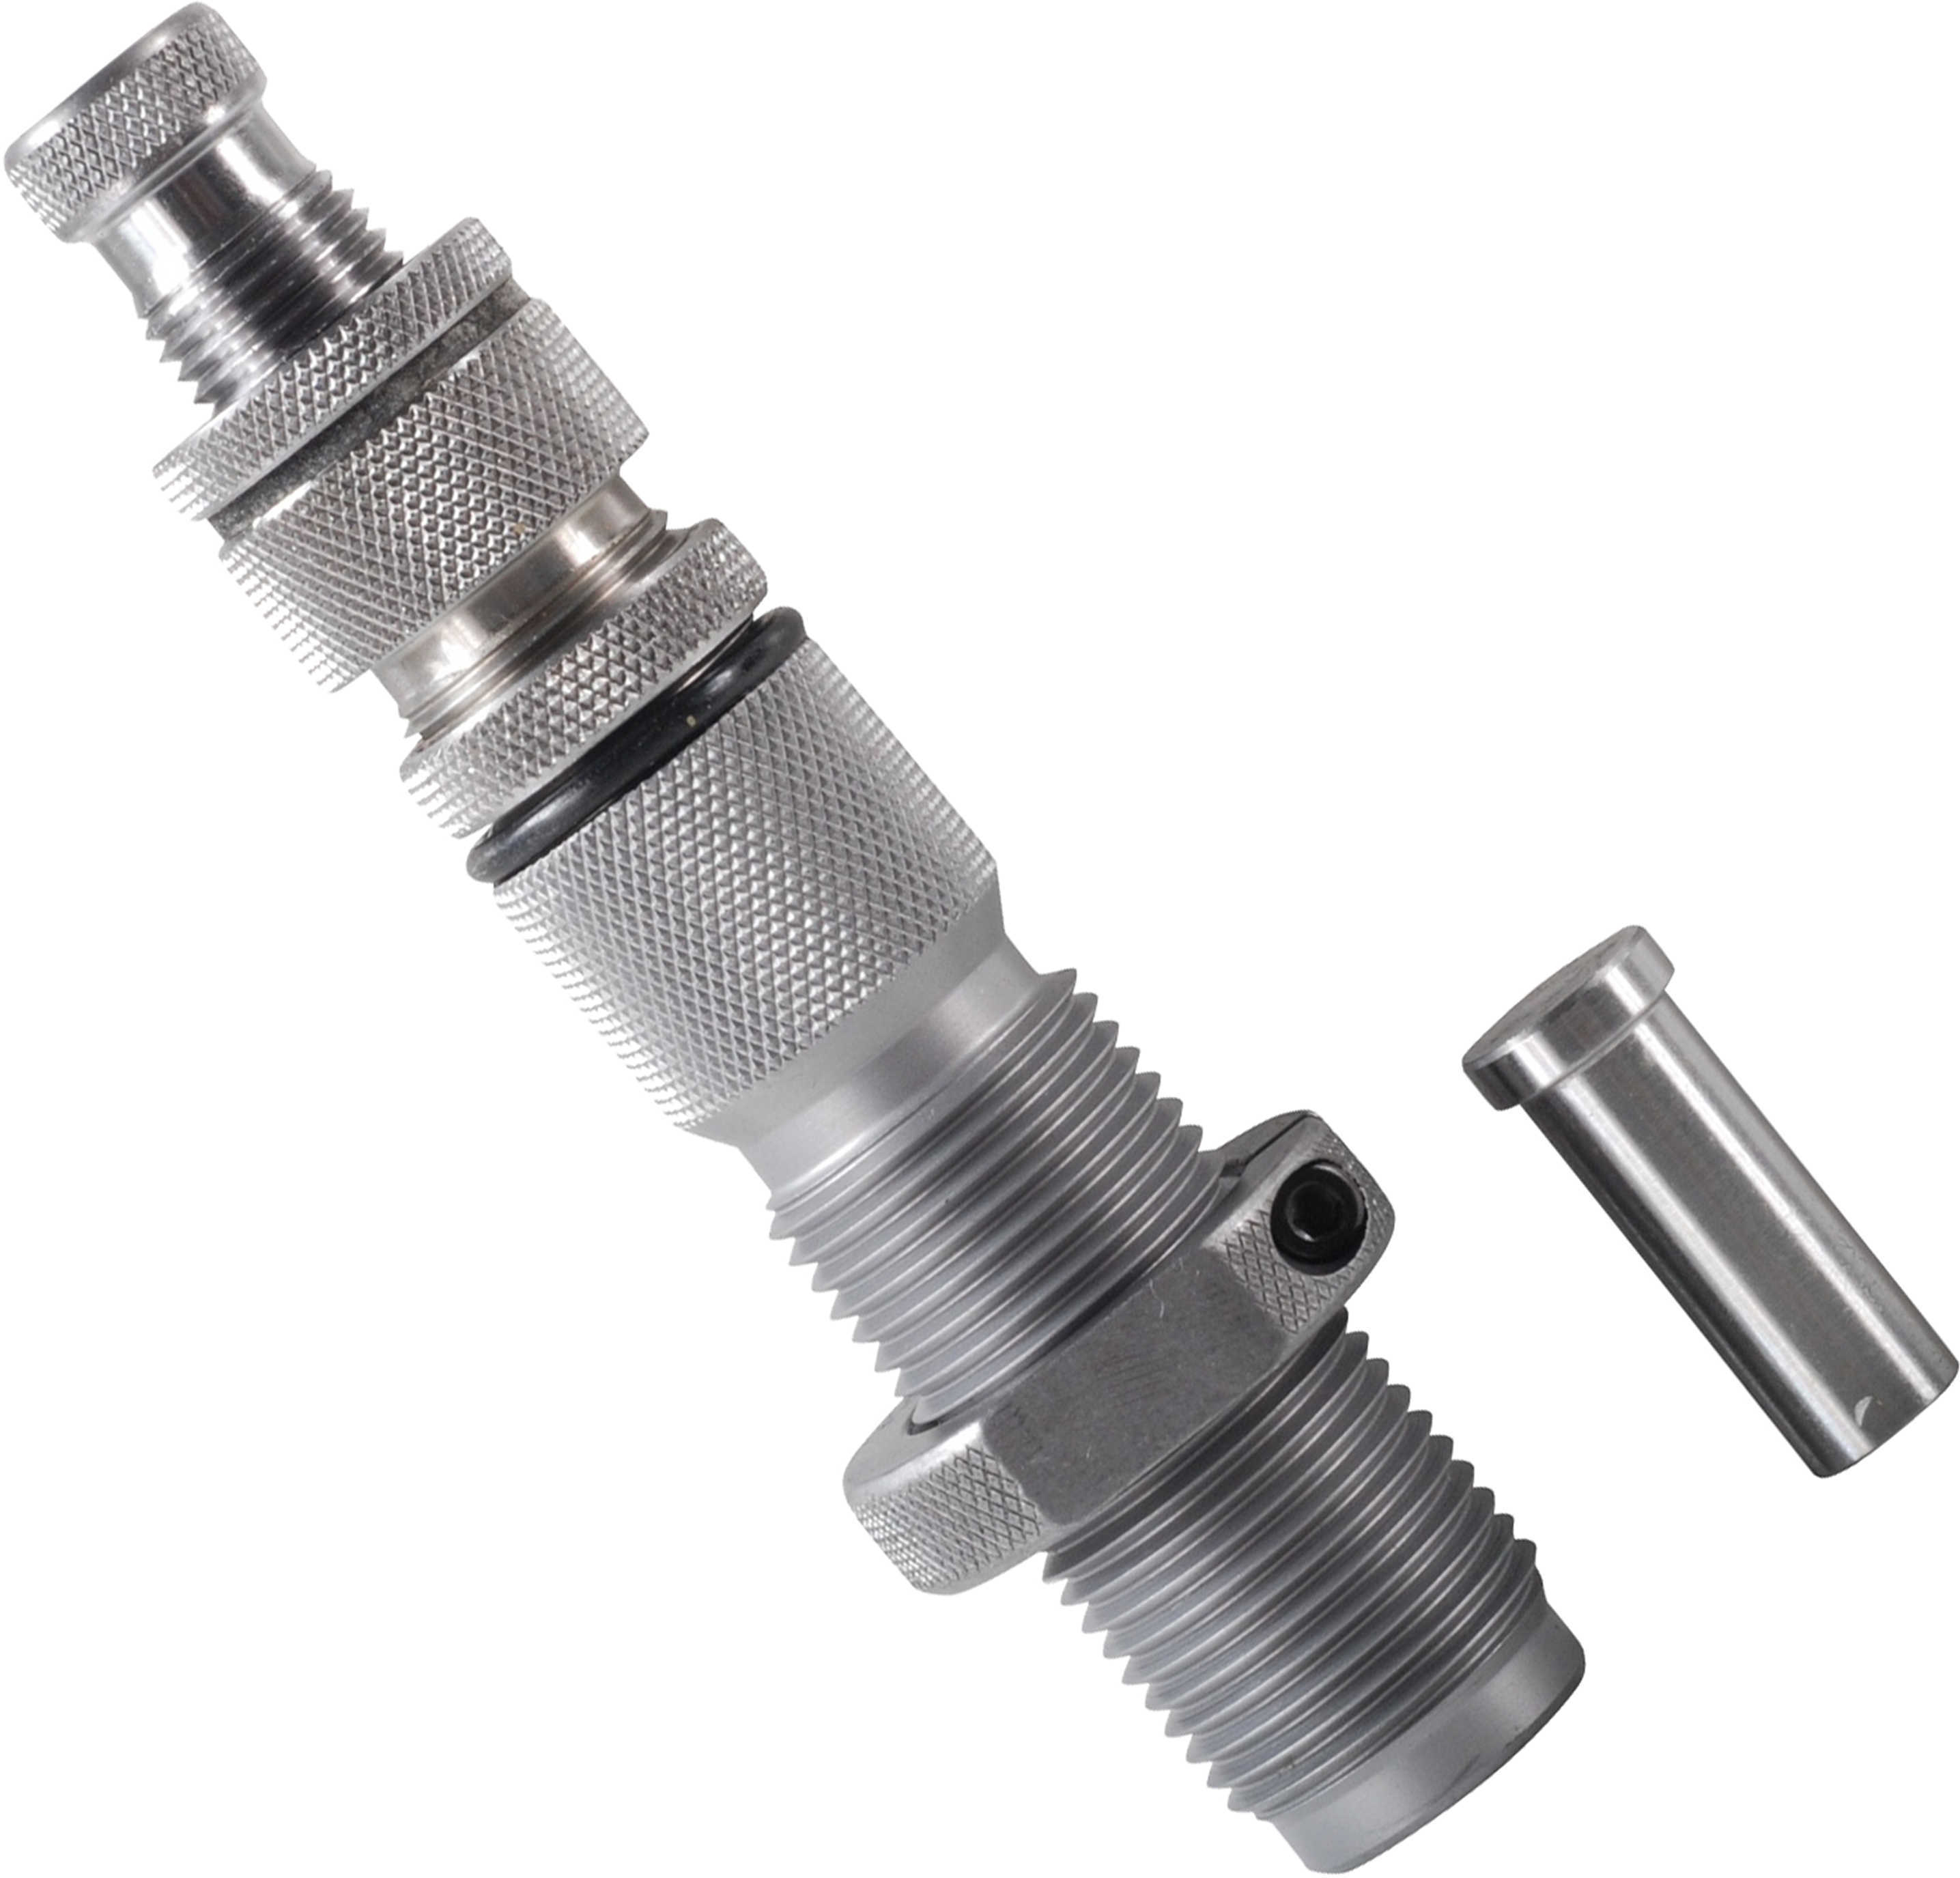 Hornady Taper Crimp Die 10mm and 40 Smith & Wesson Md: 044178